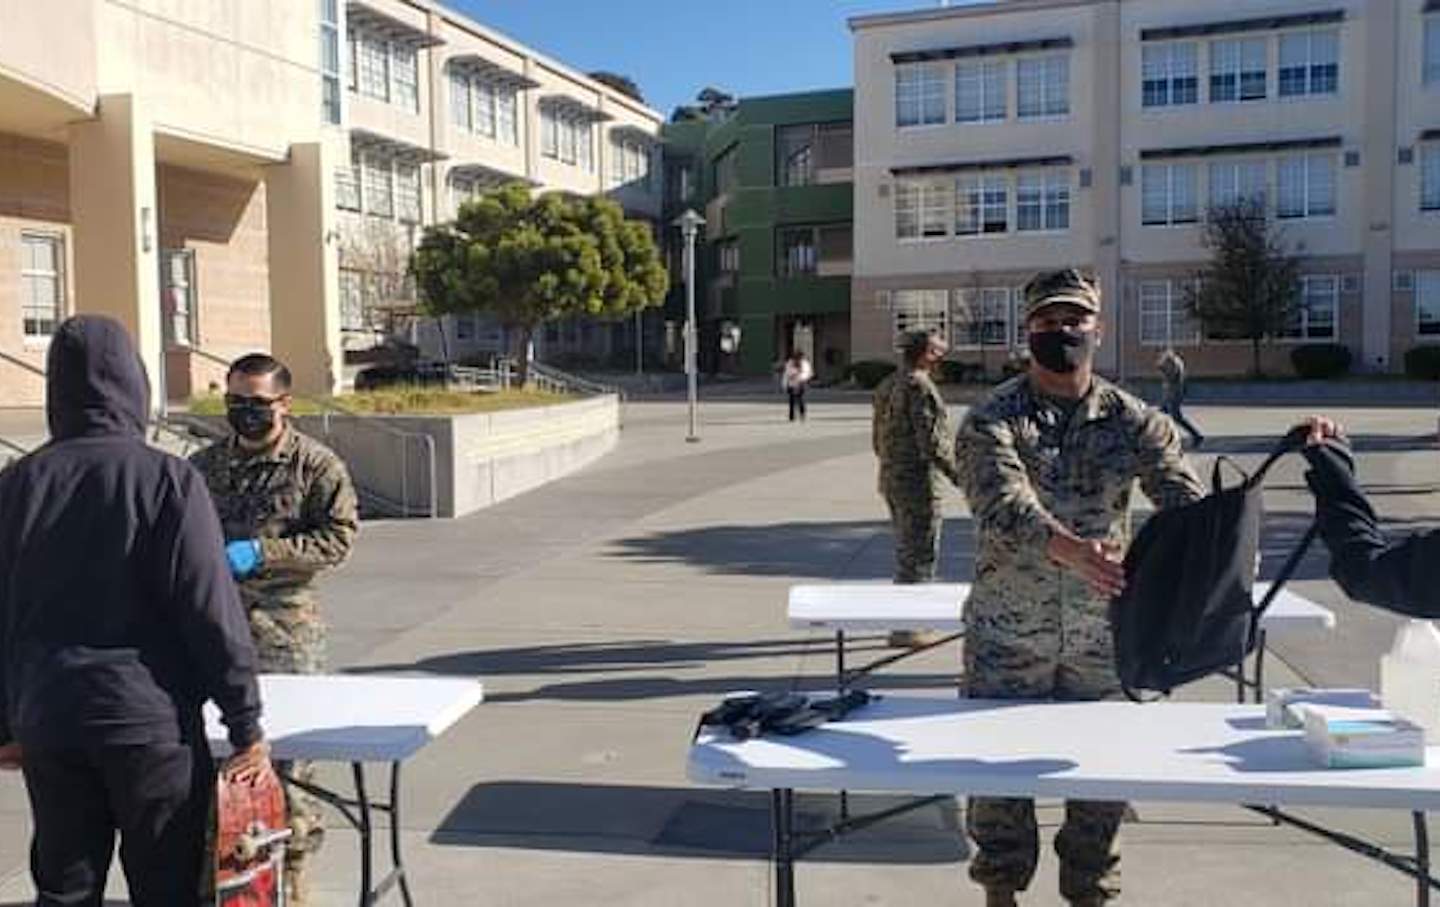 Military Personnel Searched Students at a California High School